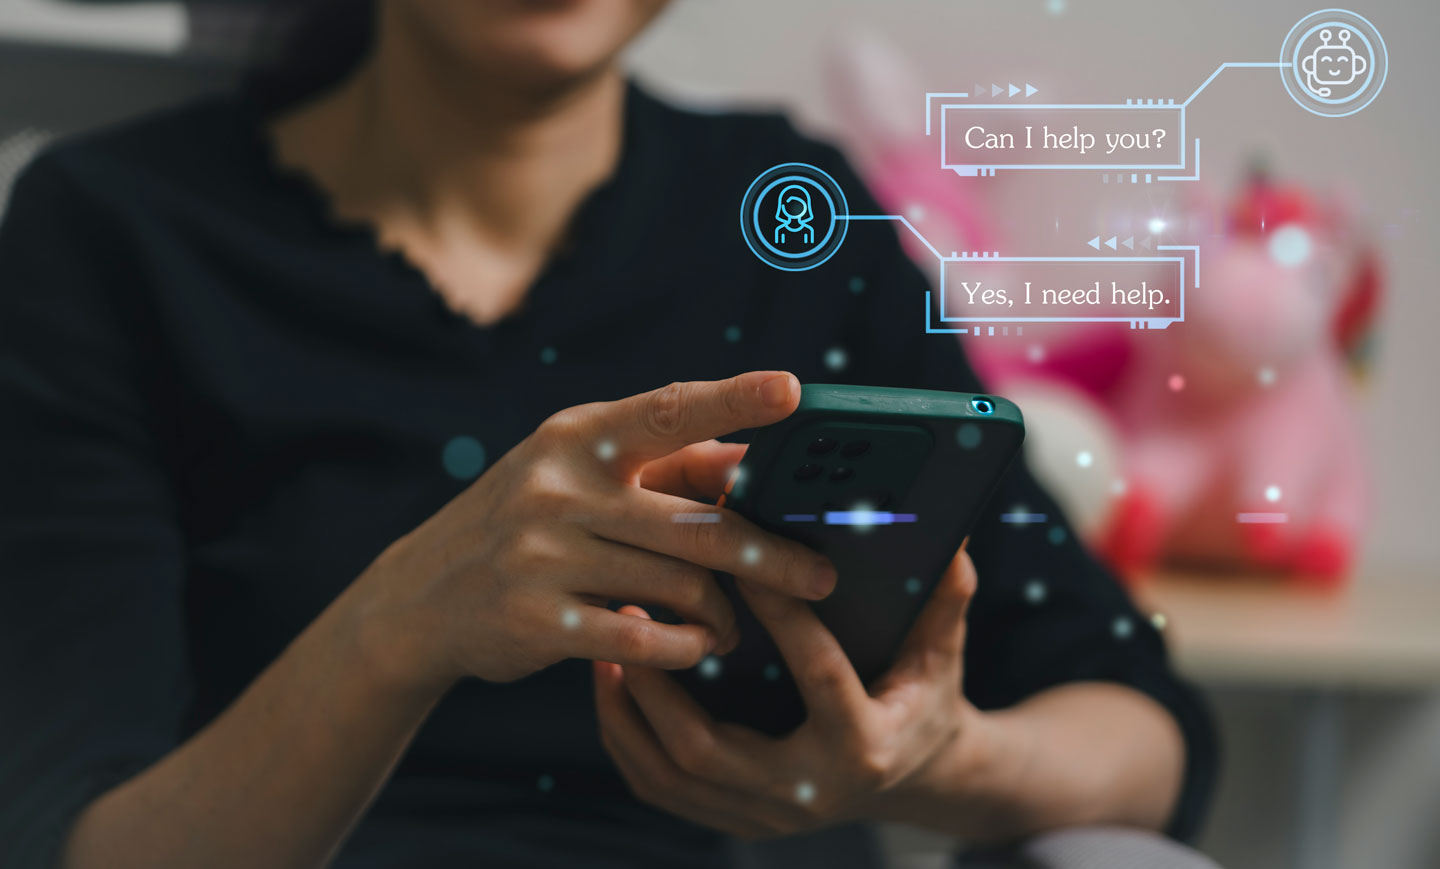 a person holds their smartphone in their hands, and above the phone a graphic shows the conversation they're having with a chatbot; the chatbot says "can I help you?" and the person says "yes, I need help"